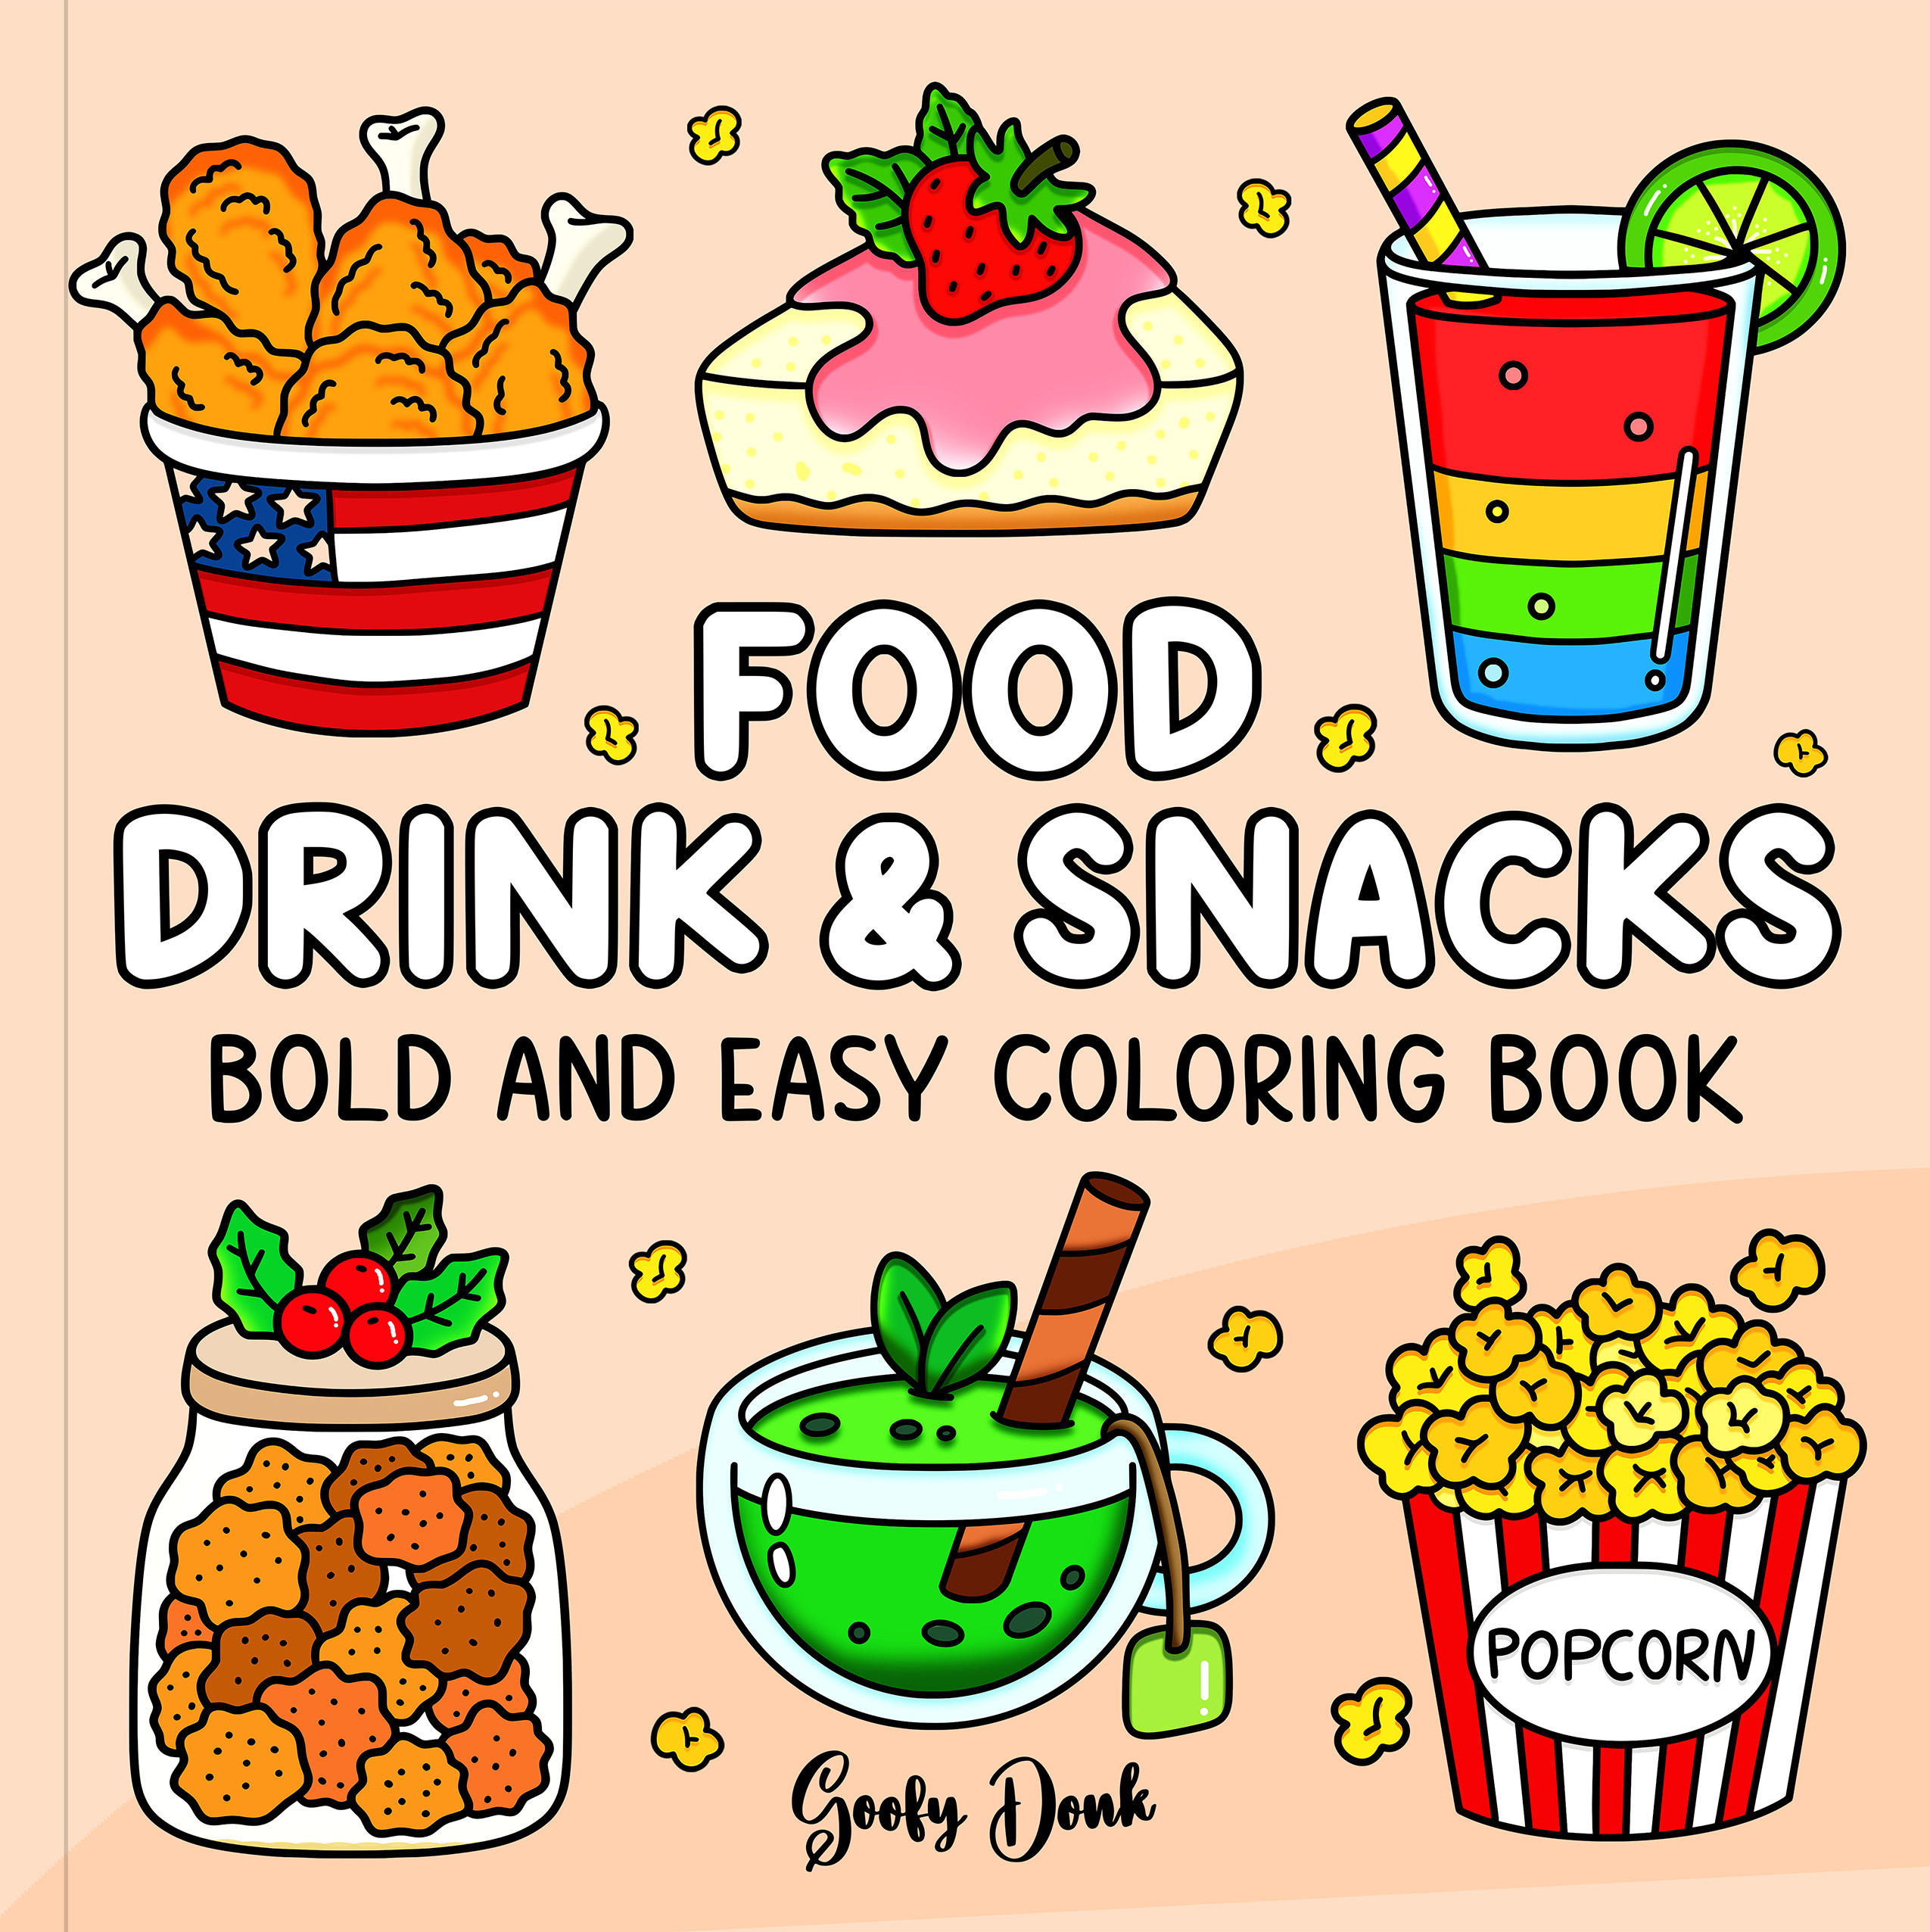 Food Drink & Snacks Bold and Easy Coloring Book